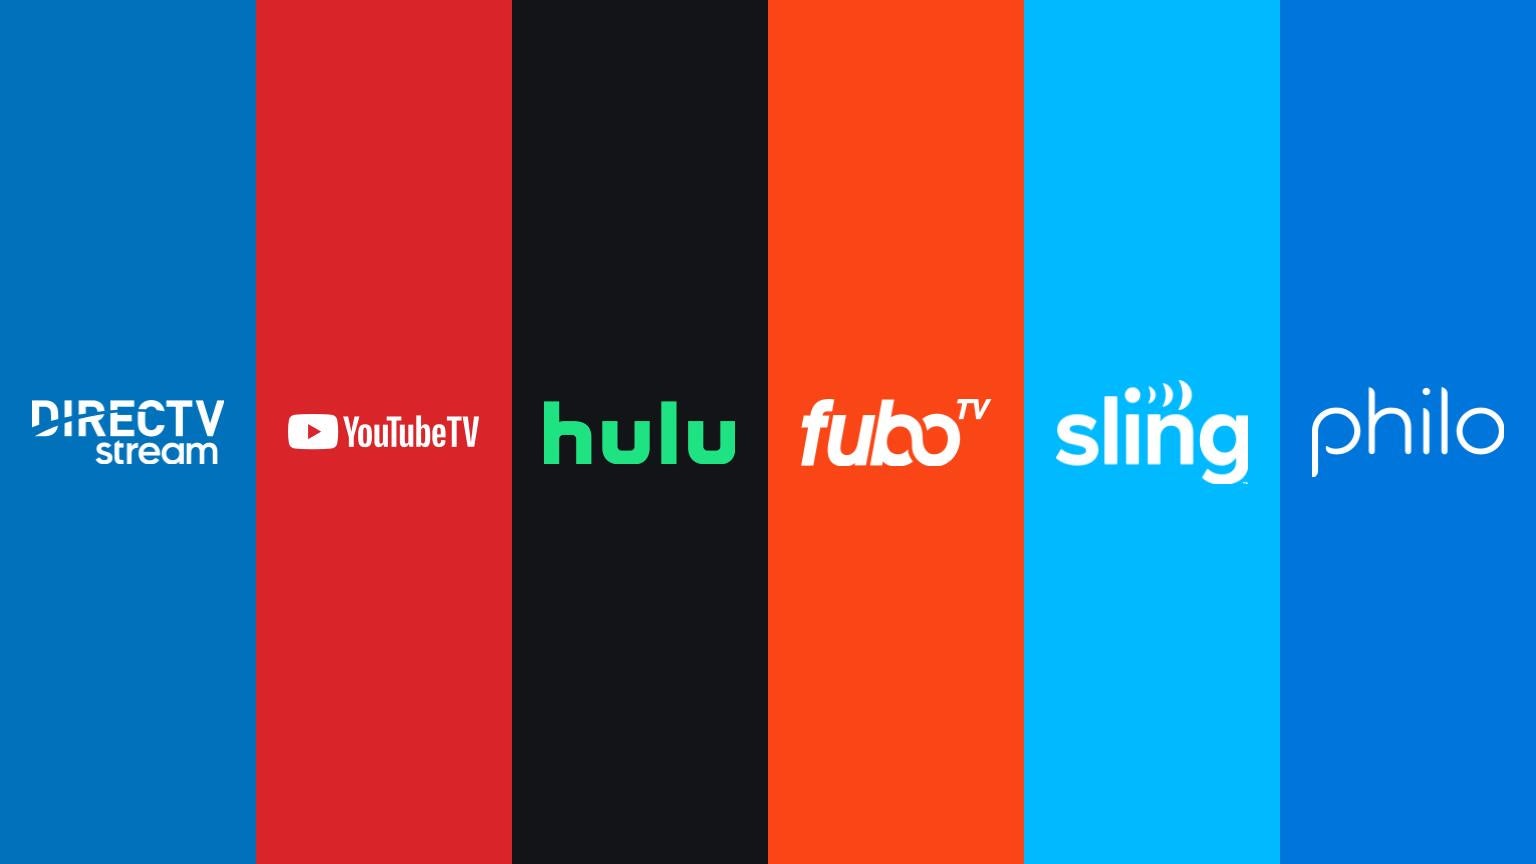 How Does Directv Stream Compare To Youtube Tv Hulu Live Tv Fubotv Sling Tv Philo The Streamable